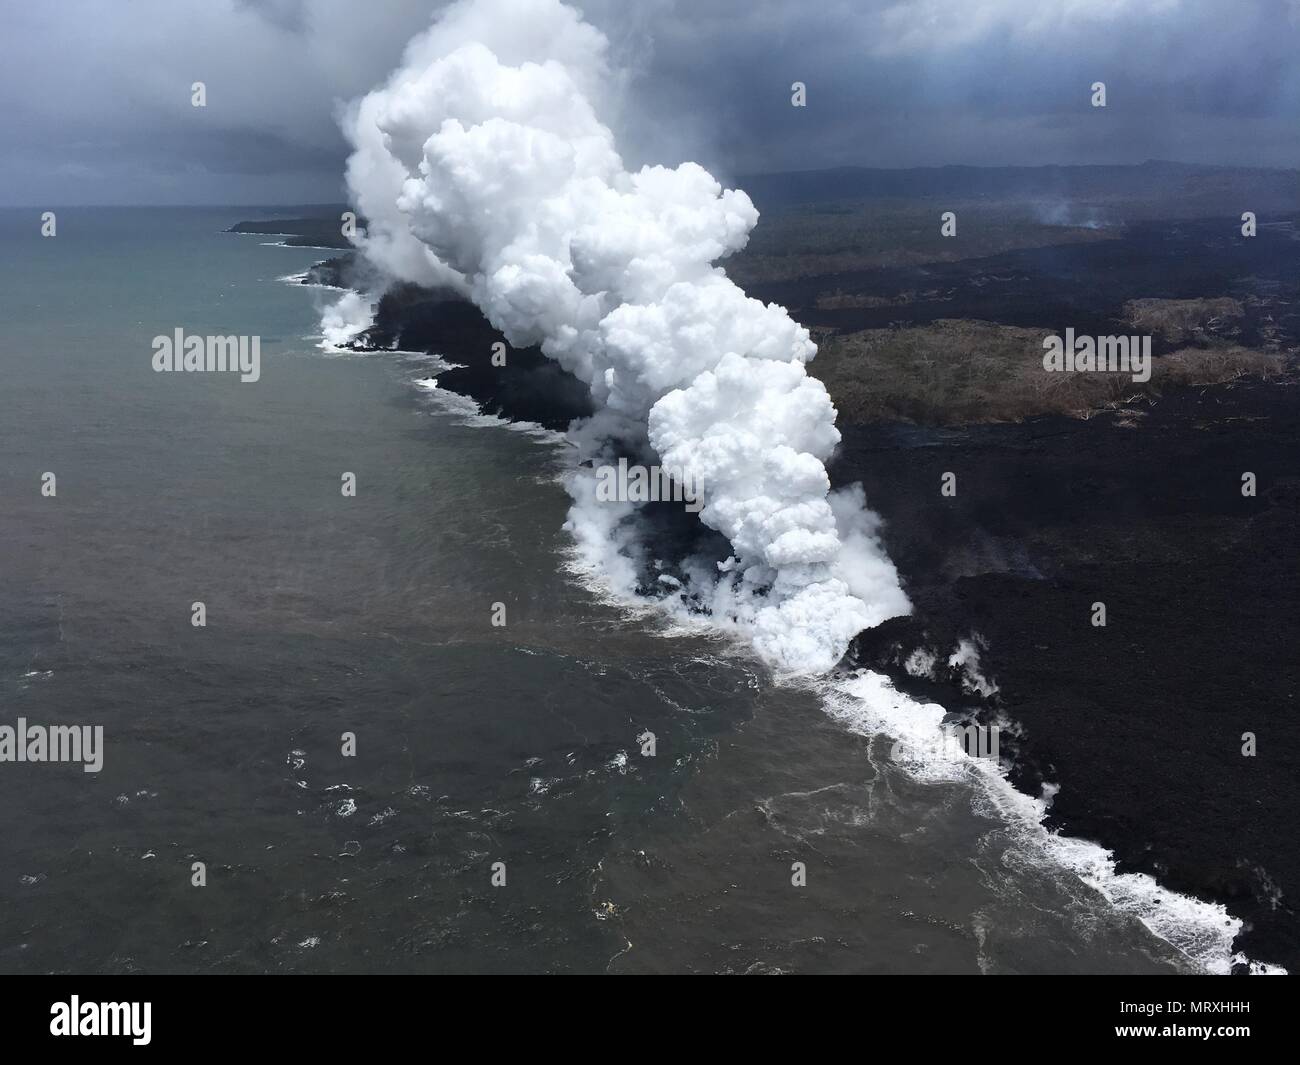 Lava and poisonous sulfur dioxide plumes rise as molten magma reaches the ocean from the eruption of the Kilauea volcano May 26, 2018 in Pahoa, Hawaii. Hot lava entering the ocean creates a dense white plume called 'laze' (short for 'lava haze'). Laze is formed as hot lava boils seawater to dryness. The process leads to a series of chemical reactions that create a billowing white cloud composed of a condensed seawater steam, hydrochloric acid gas, and tiny shards of volcanic glass. The cloud is as corrosive as dilute battery acid, and should be avoided. Stock Photo